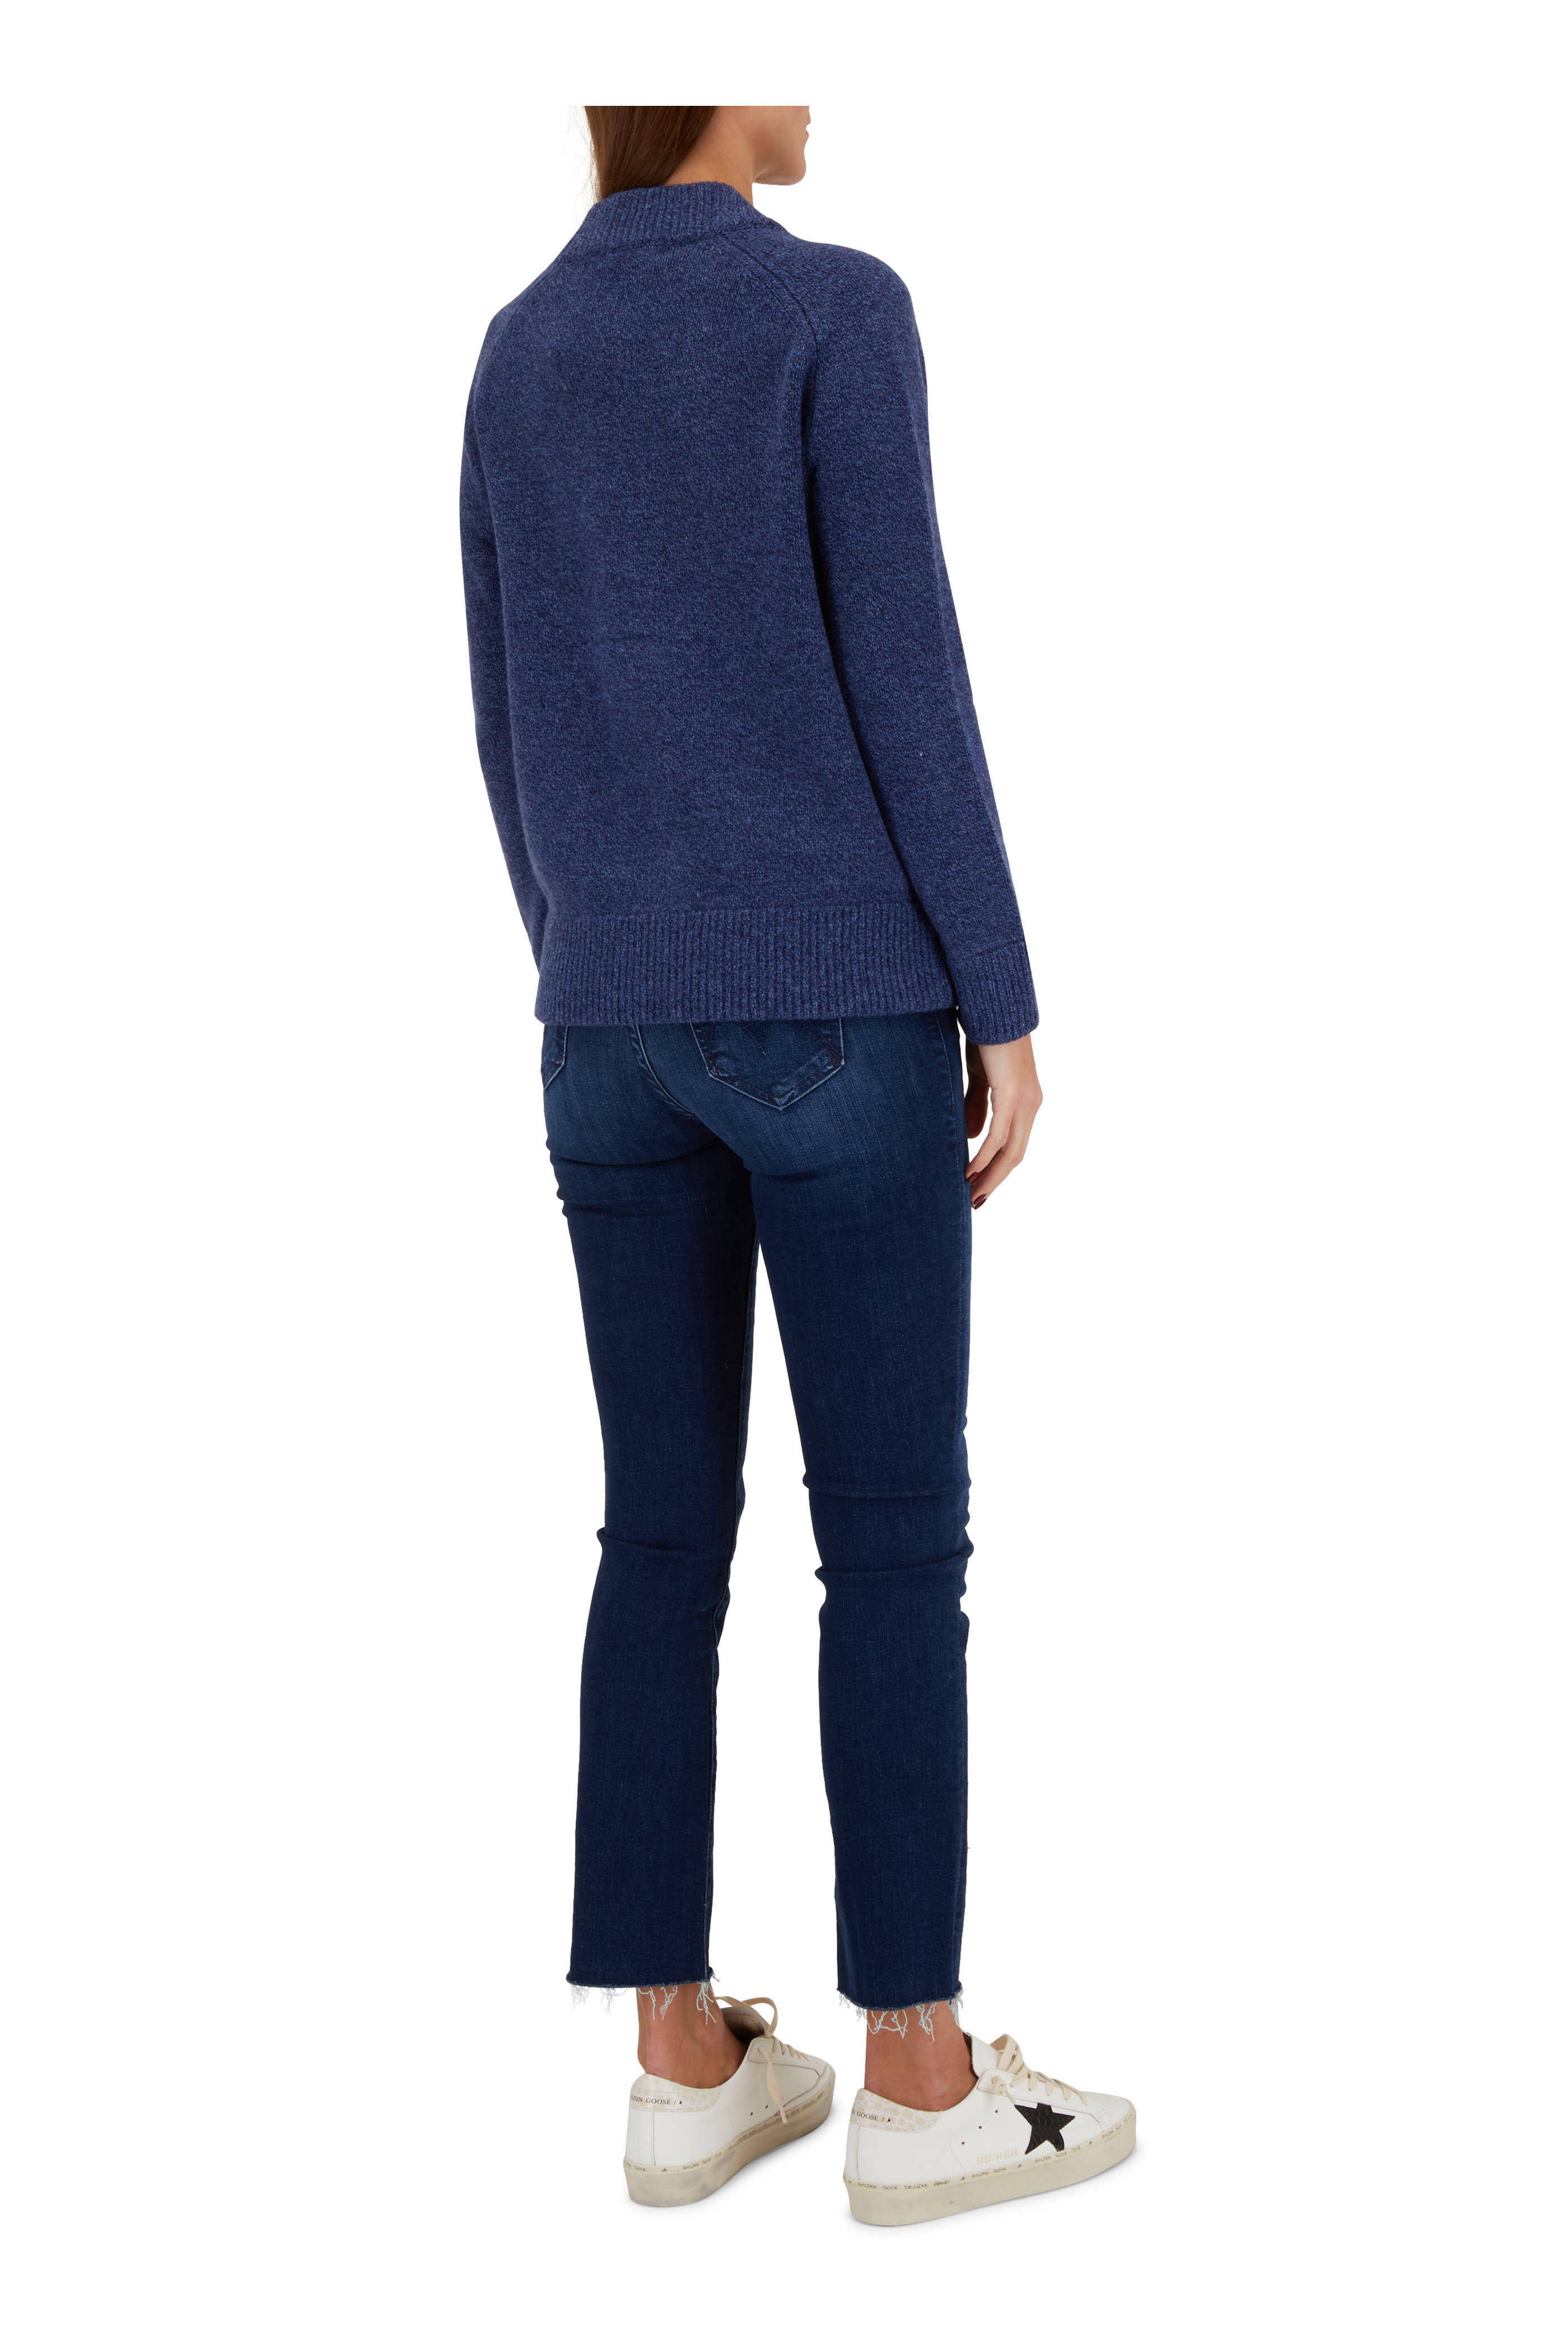 CO Collection - Blue Mélange Wool Oversized Cardigan